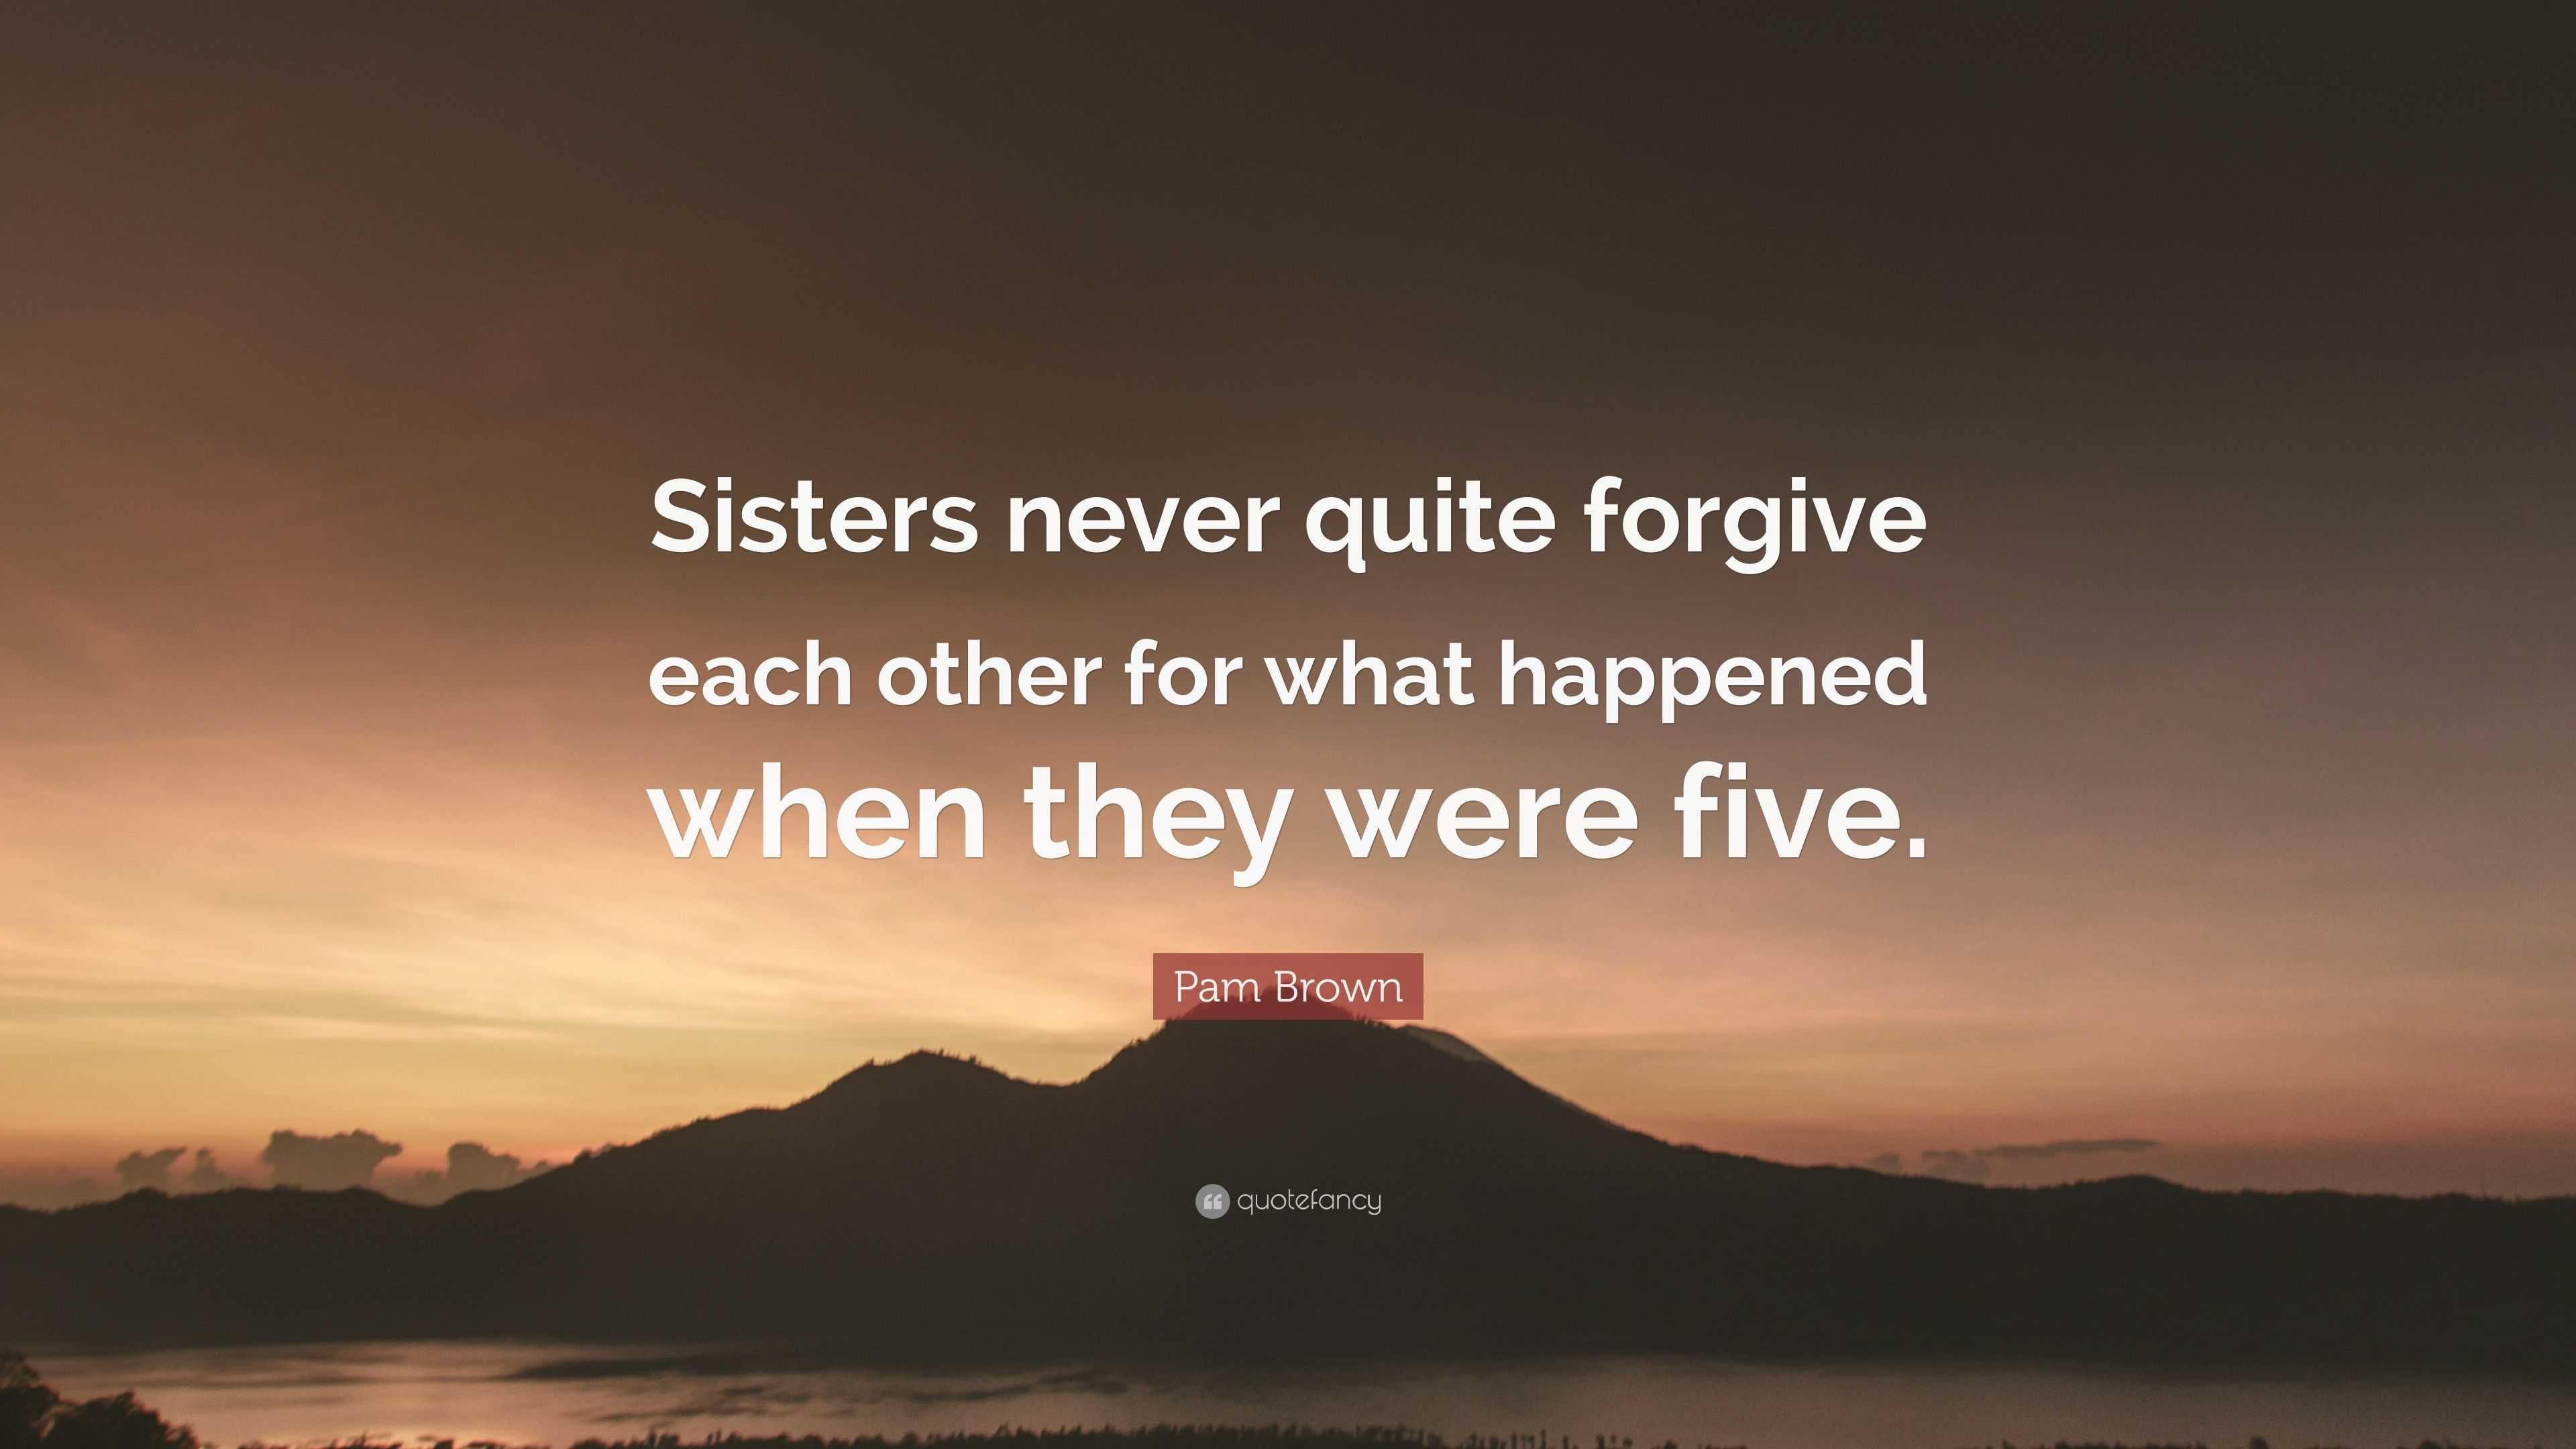 Pam Brown Quote: “Sisters never quite forgive each other for what ...